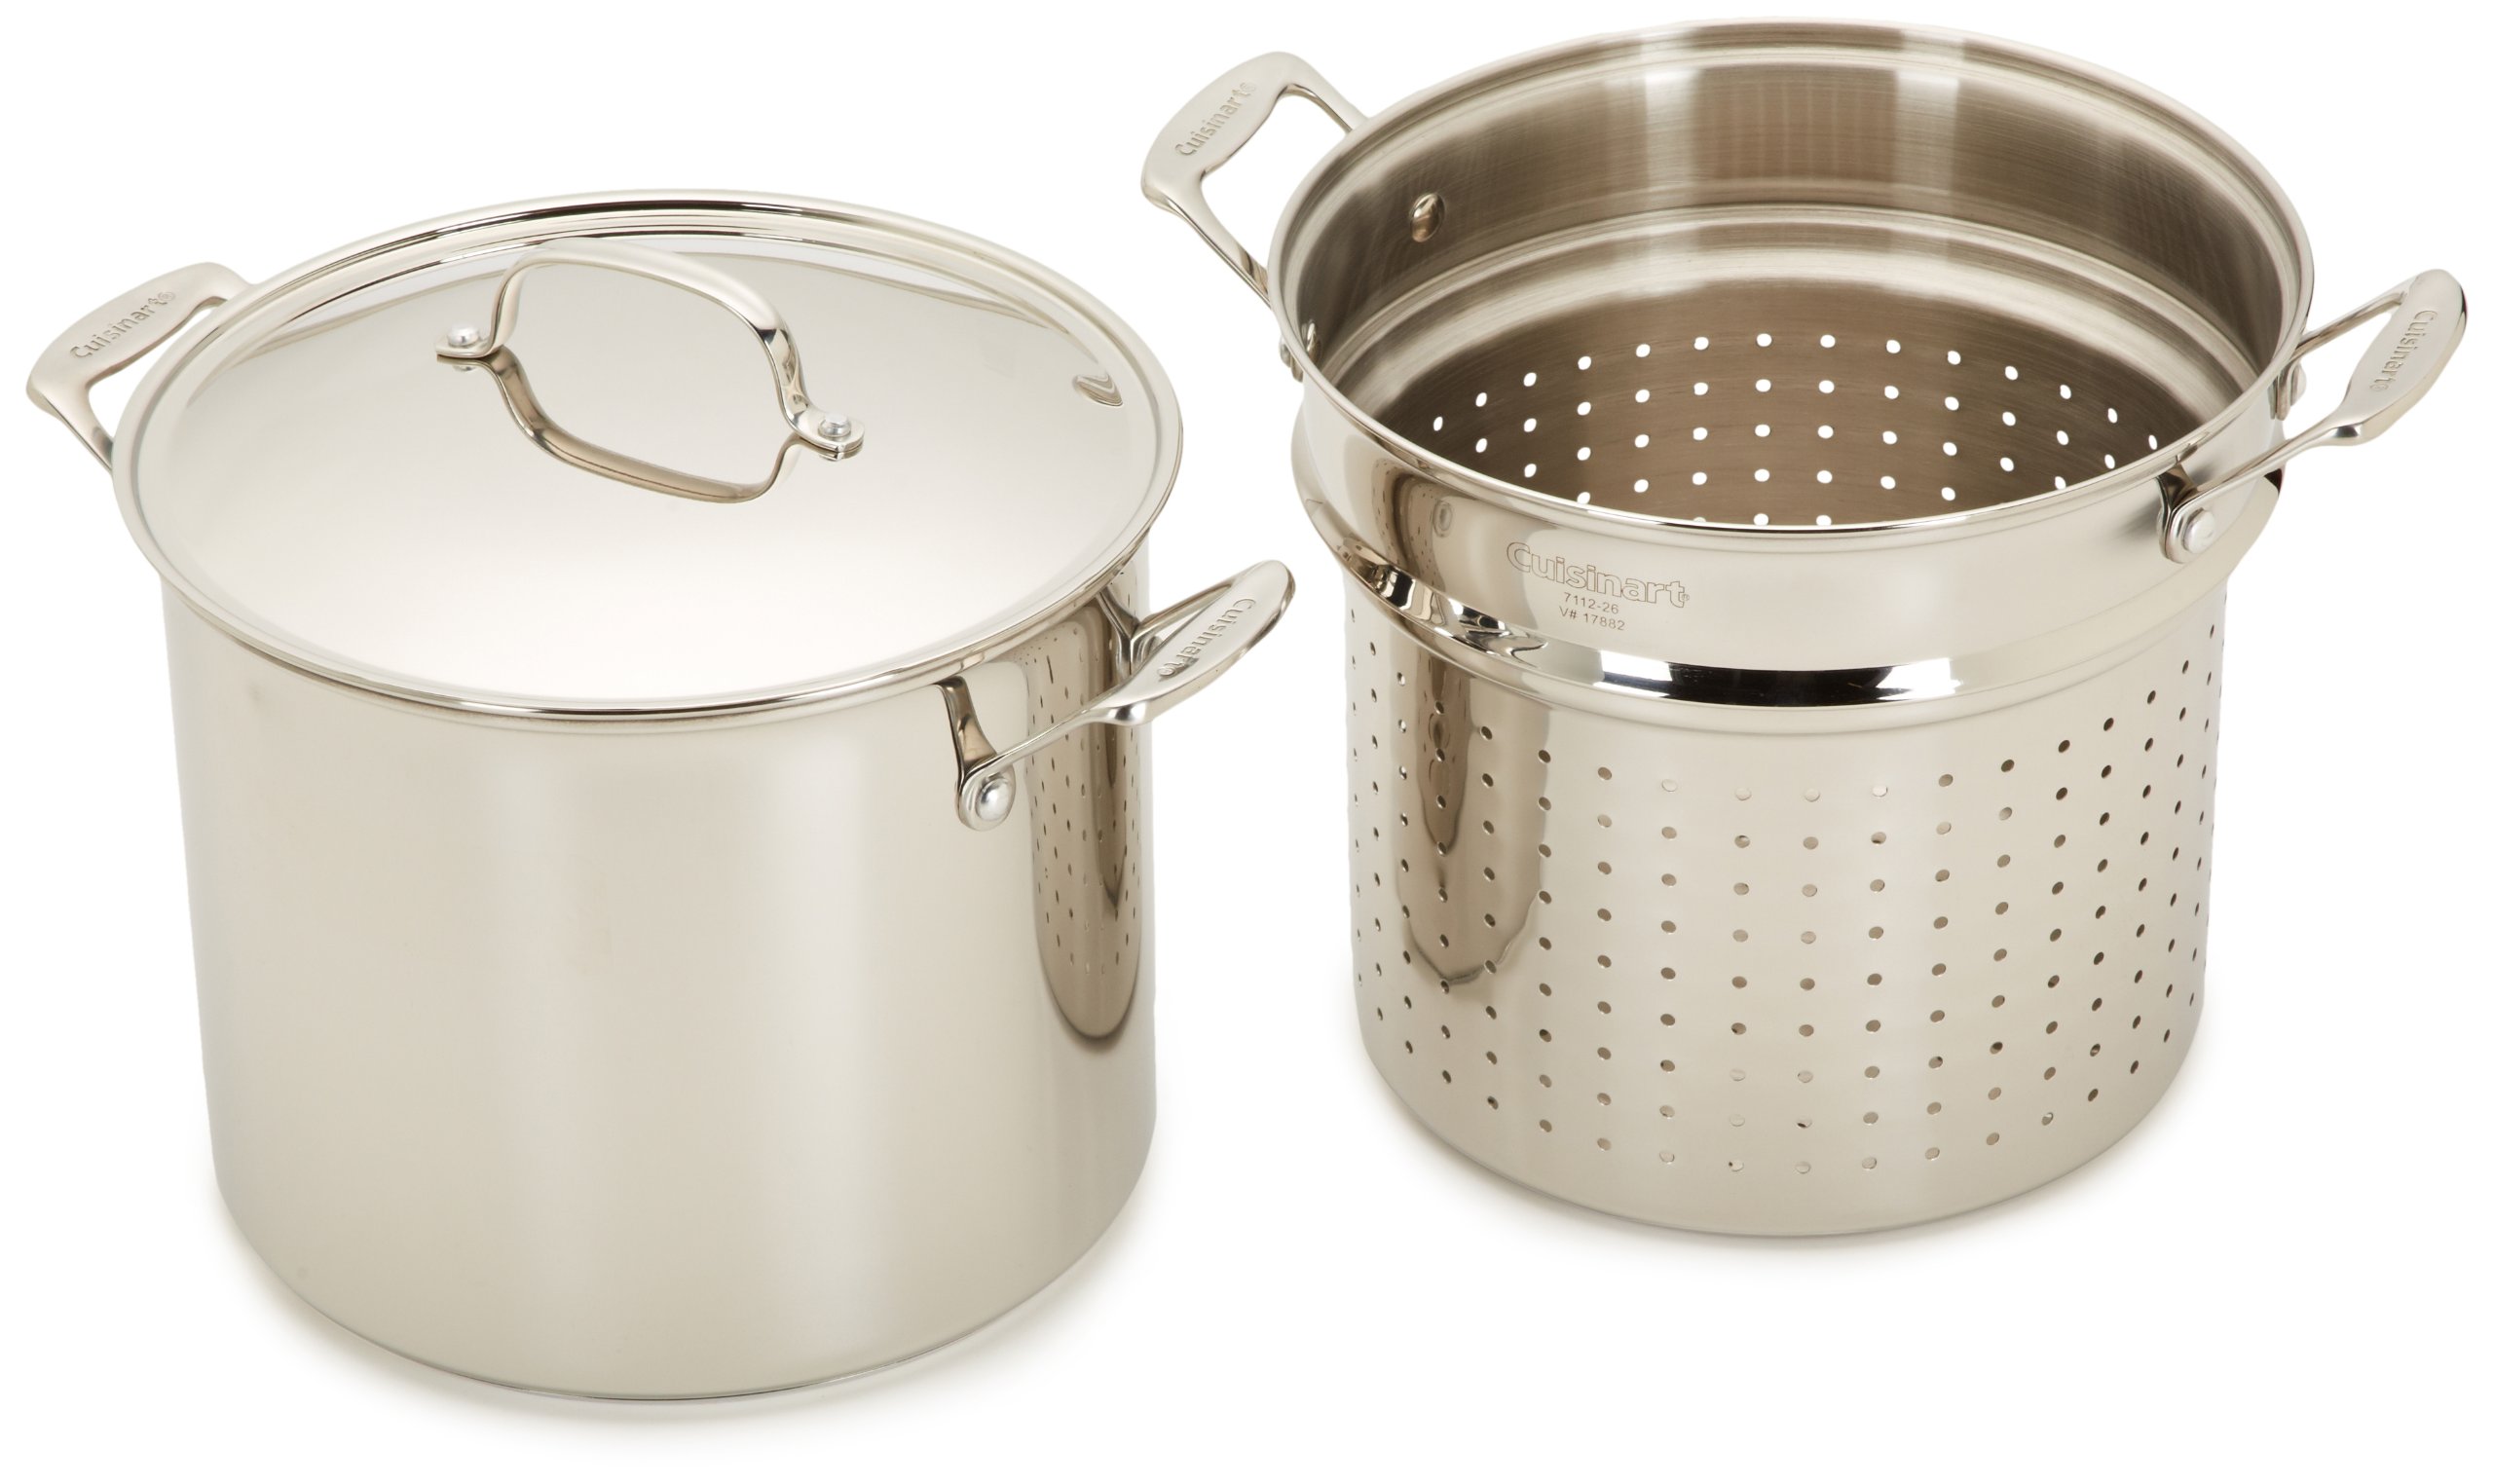 Cuisinart 77-412P1 Piece 12-Quart Chef's-Classic-Stainless-Cookware-Collection, Pasta/Steamer Set (4-Pc.) & 7117-16UR Chef's Classic 16-Inch Rectangular Roaster with Rack, Stainless Steel